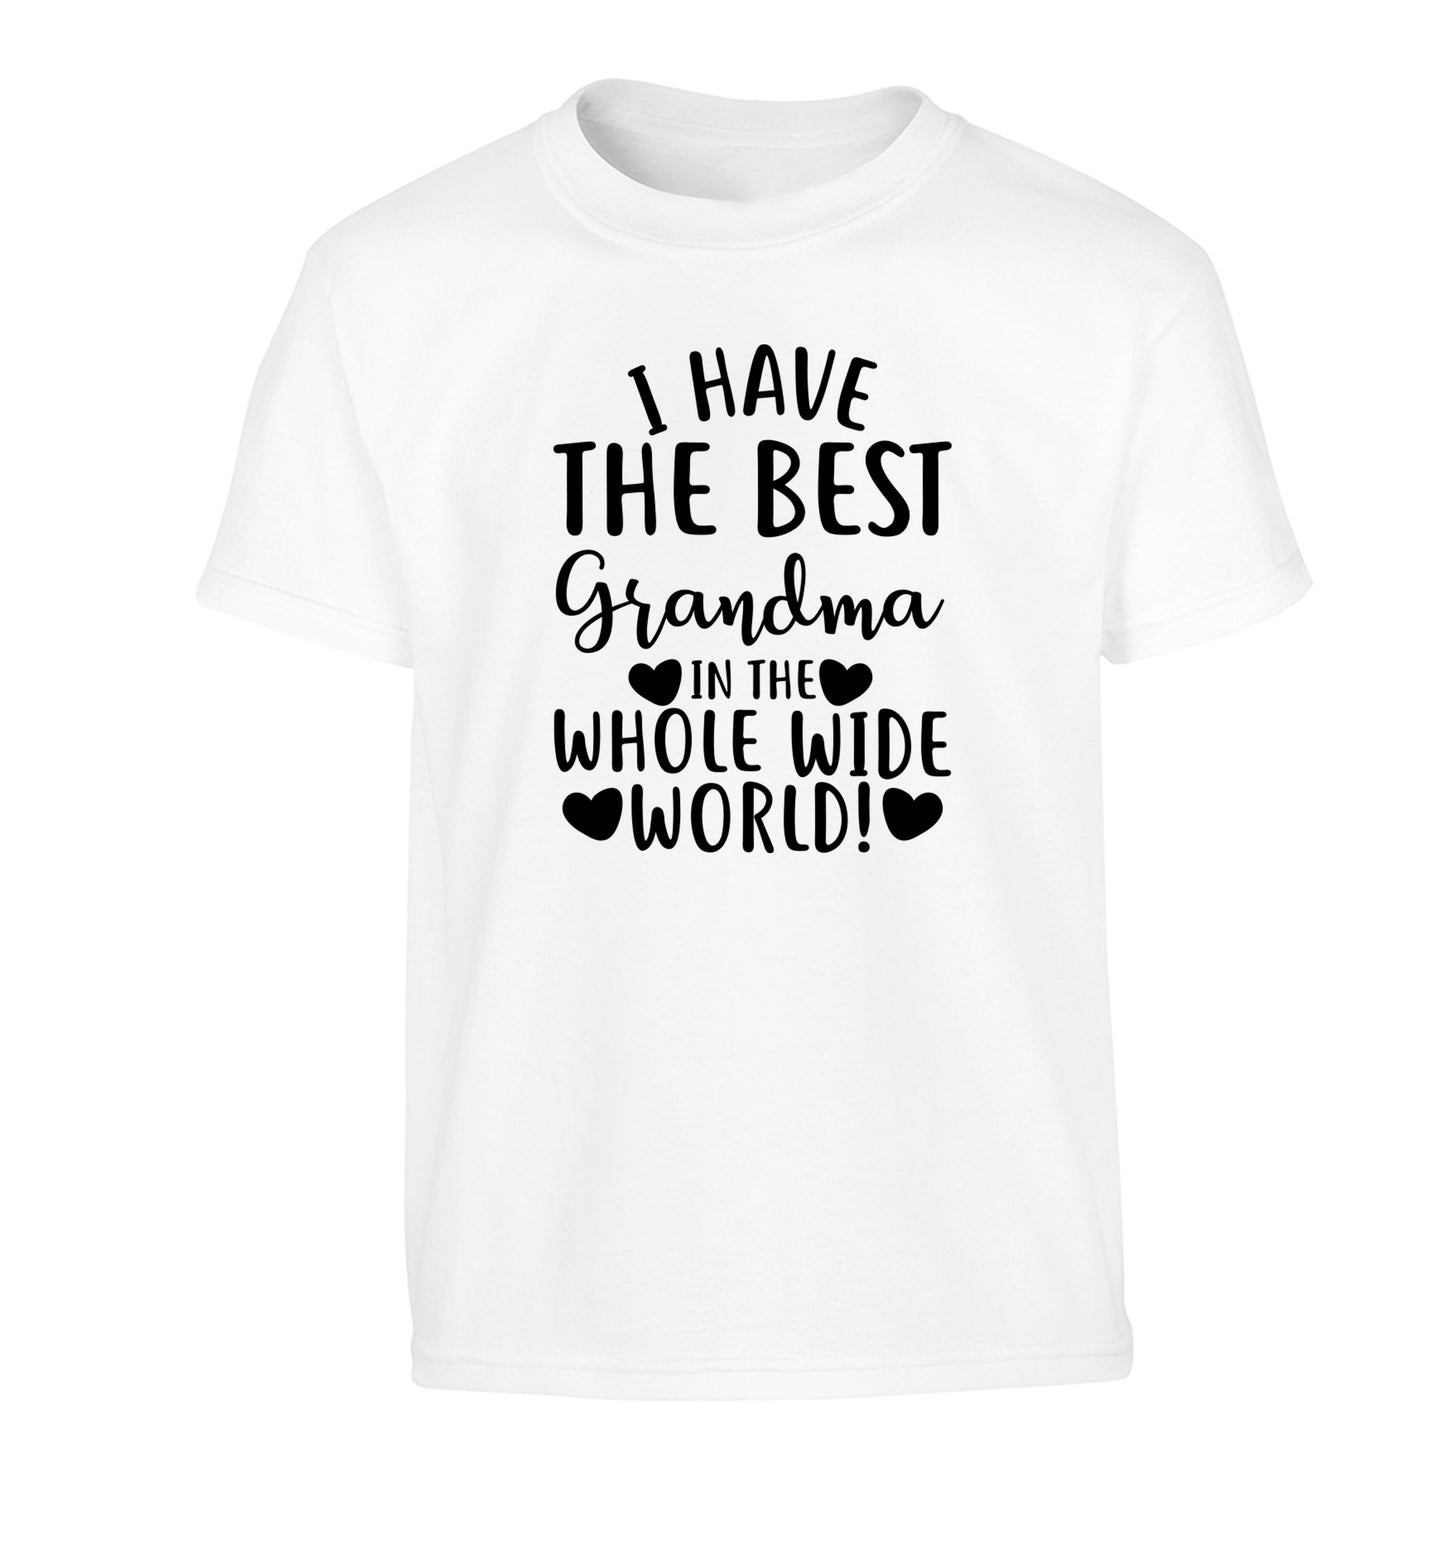 I have the best grandma in the whole wide world! Children's white Tshirt 12-13 Years